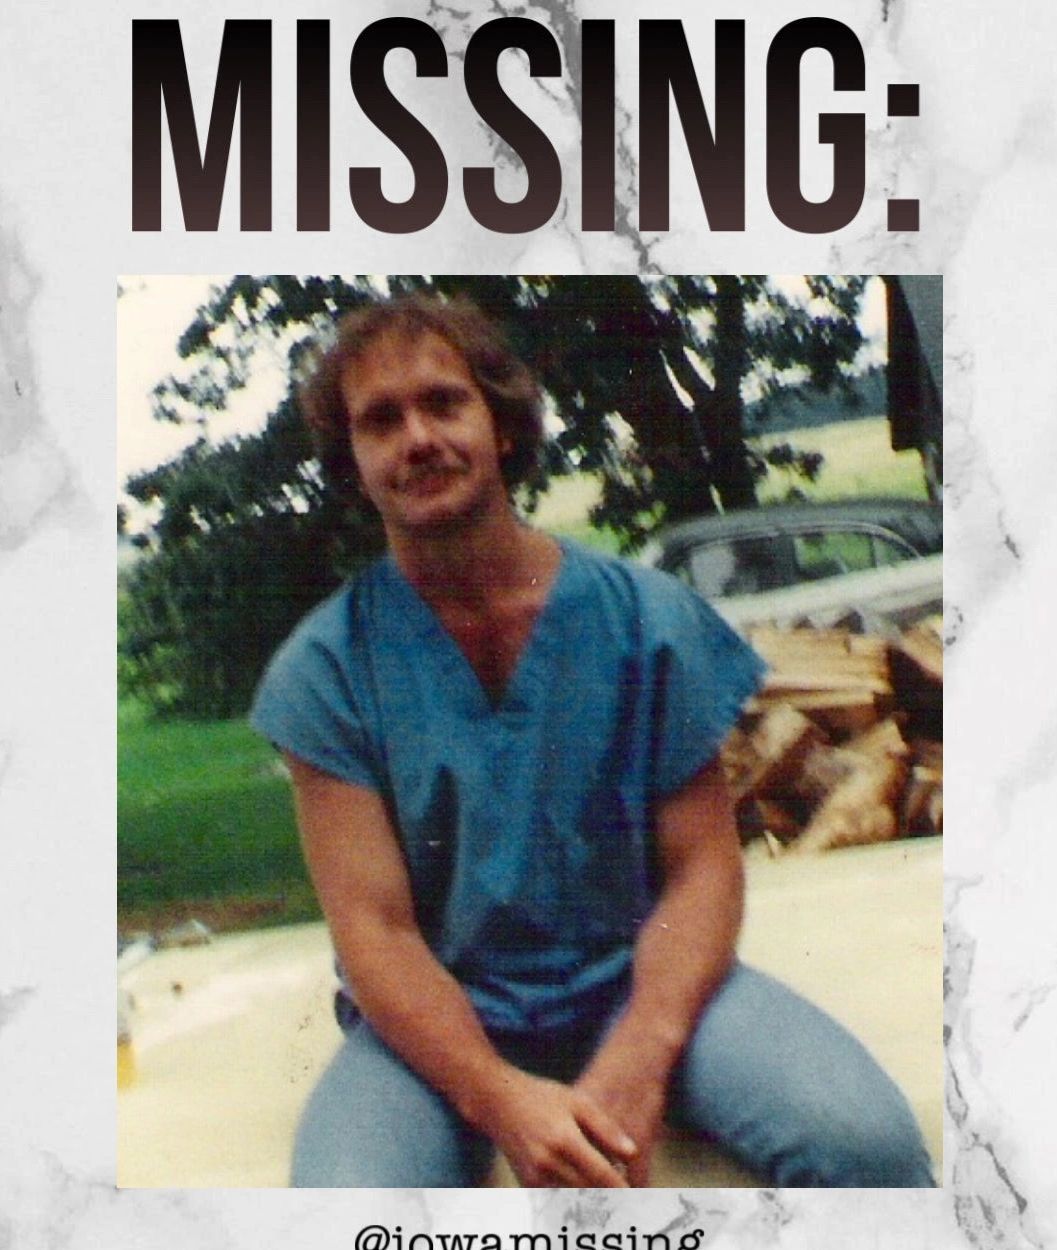 Brian Blachut in August 1993, three months before he went missing.